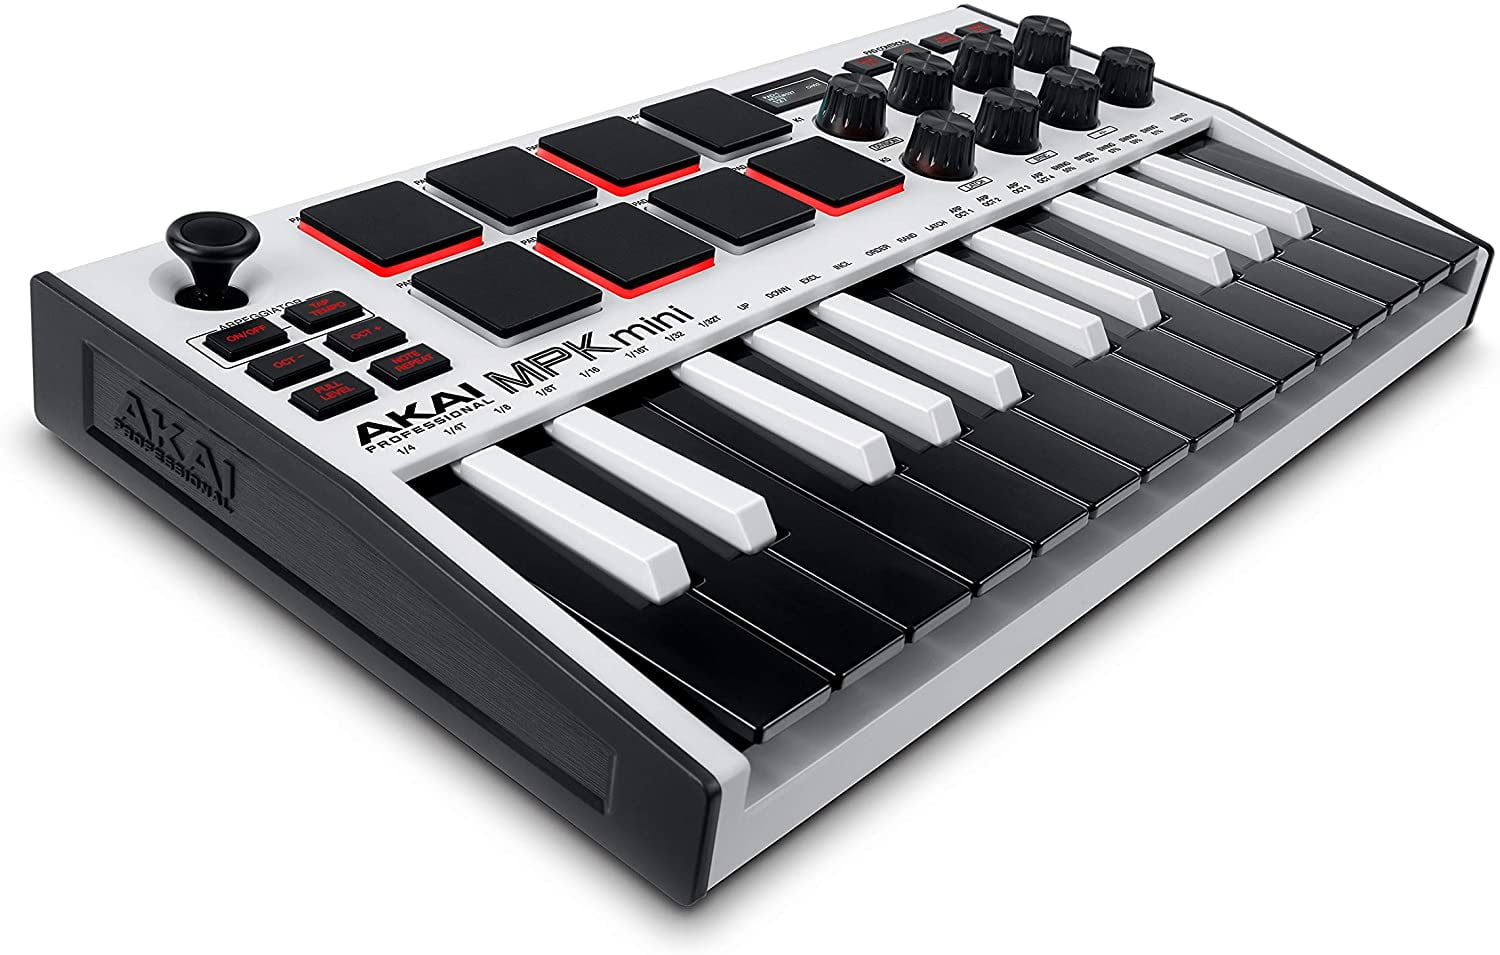 AKAI Professional MPK Mini MK3 25 Key USB MIDI Keyboard Controller with 8  Backlit Drum Pads, 8 Knobs and Music Production Software, Black 